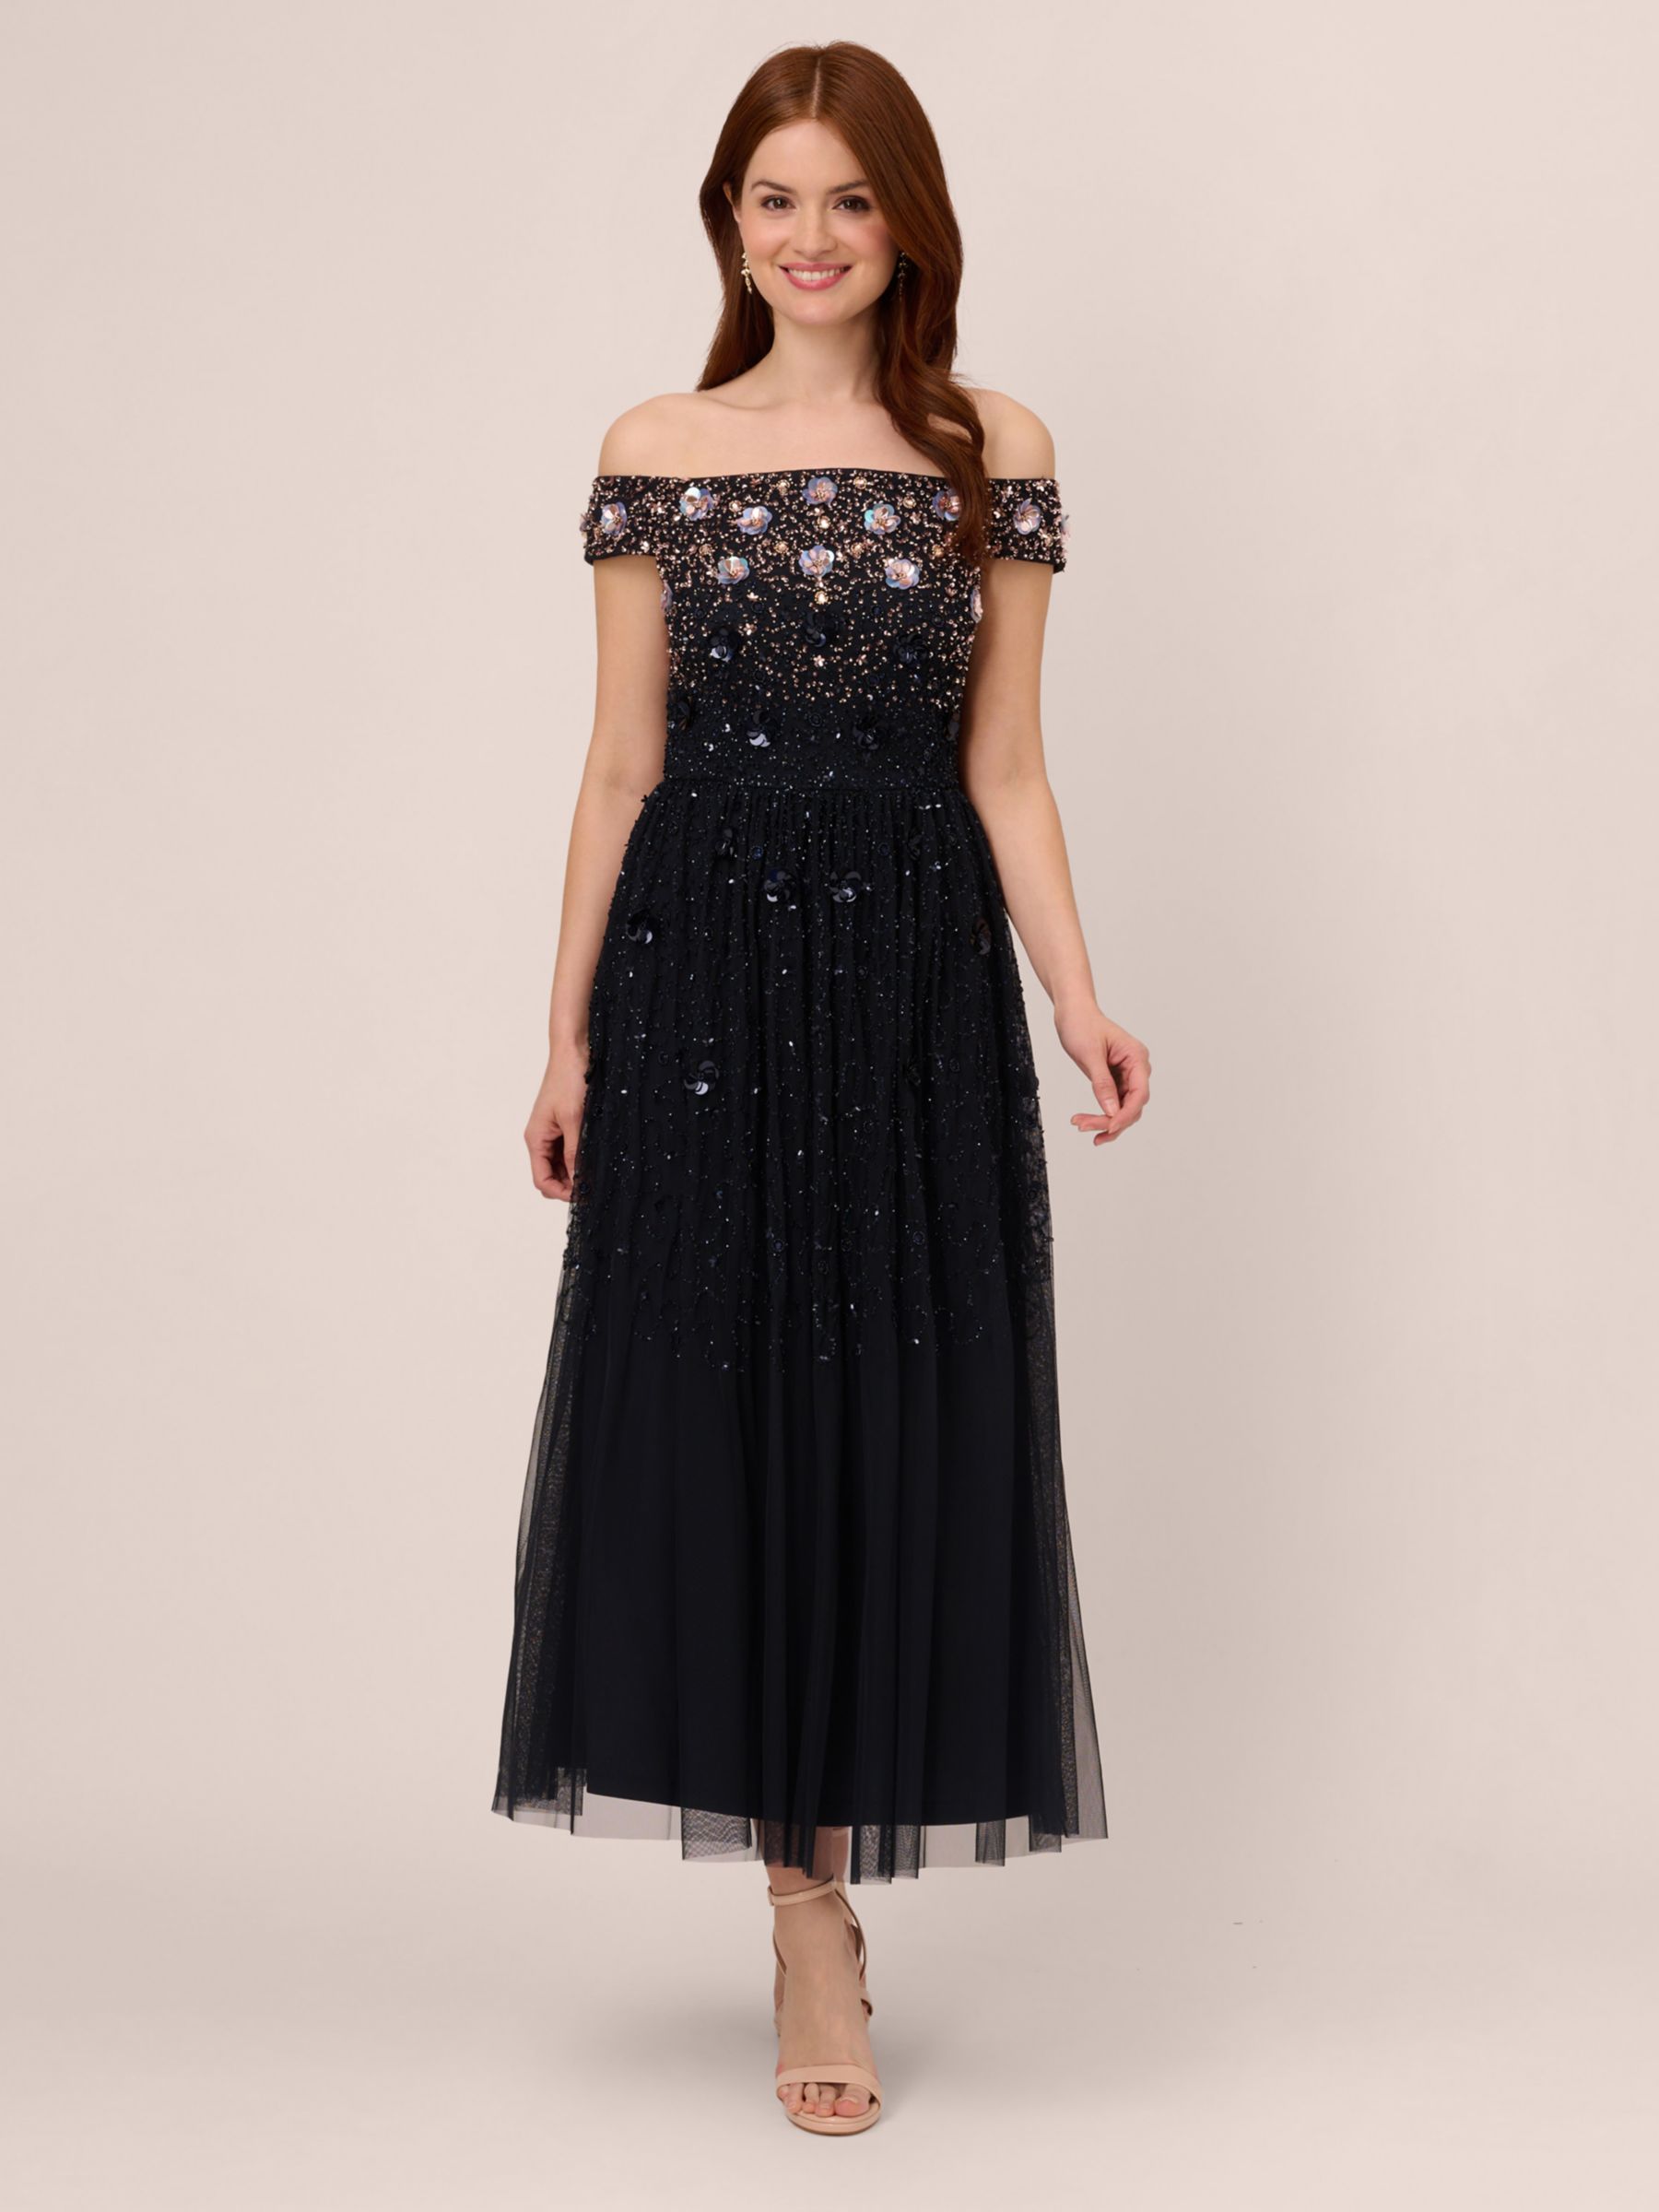 Adrianna Papell Sequin Rosettes Dress, Navy/Rose Gold, 6